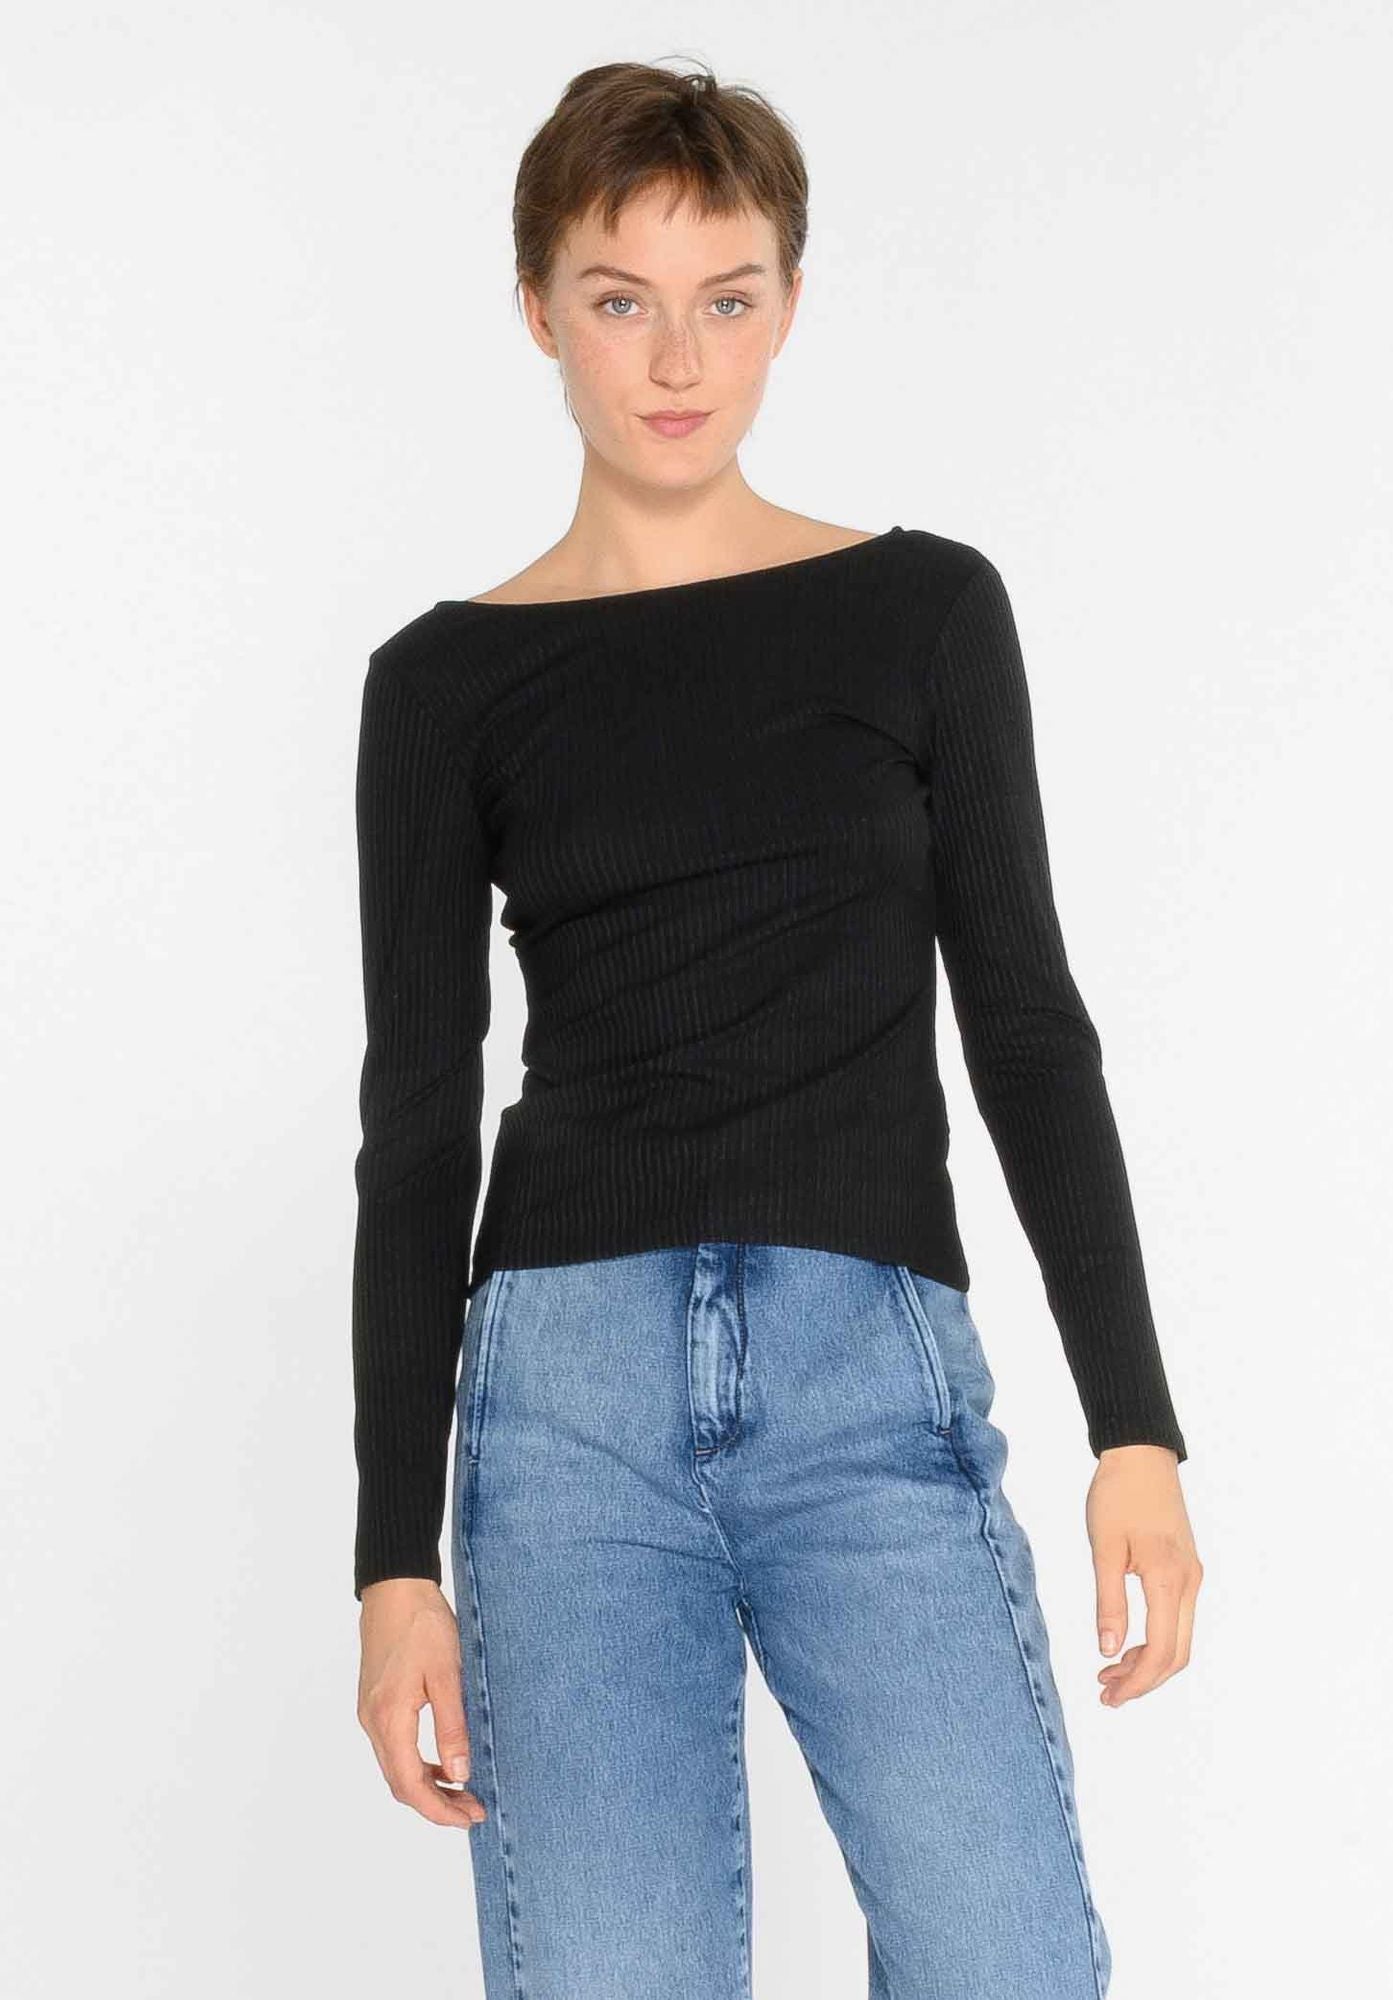 Long-sleeved shirt FUMARIA in black by LOVJOI made of TENCEL™ (ST)